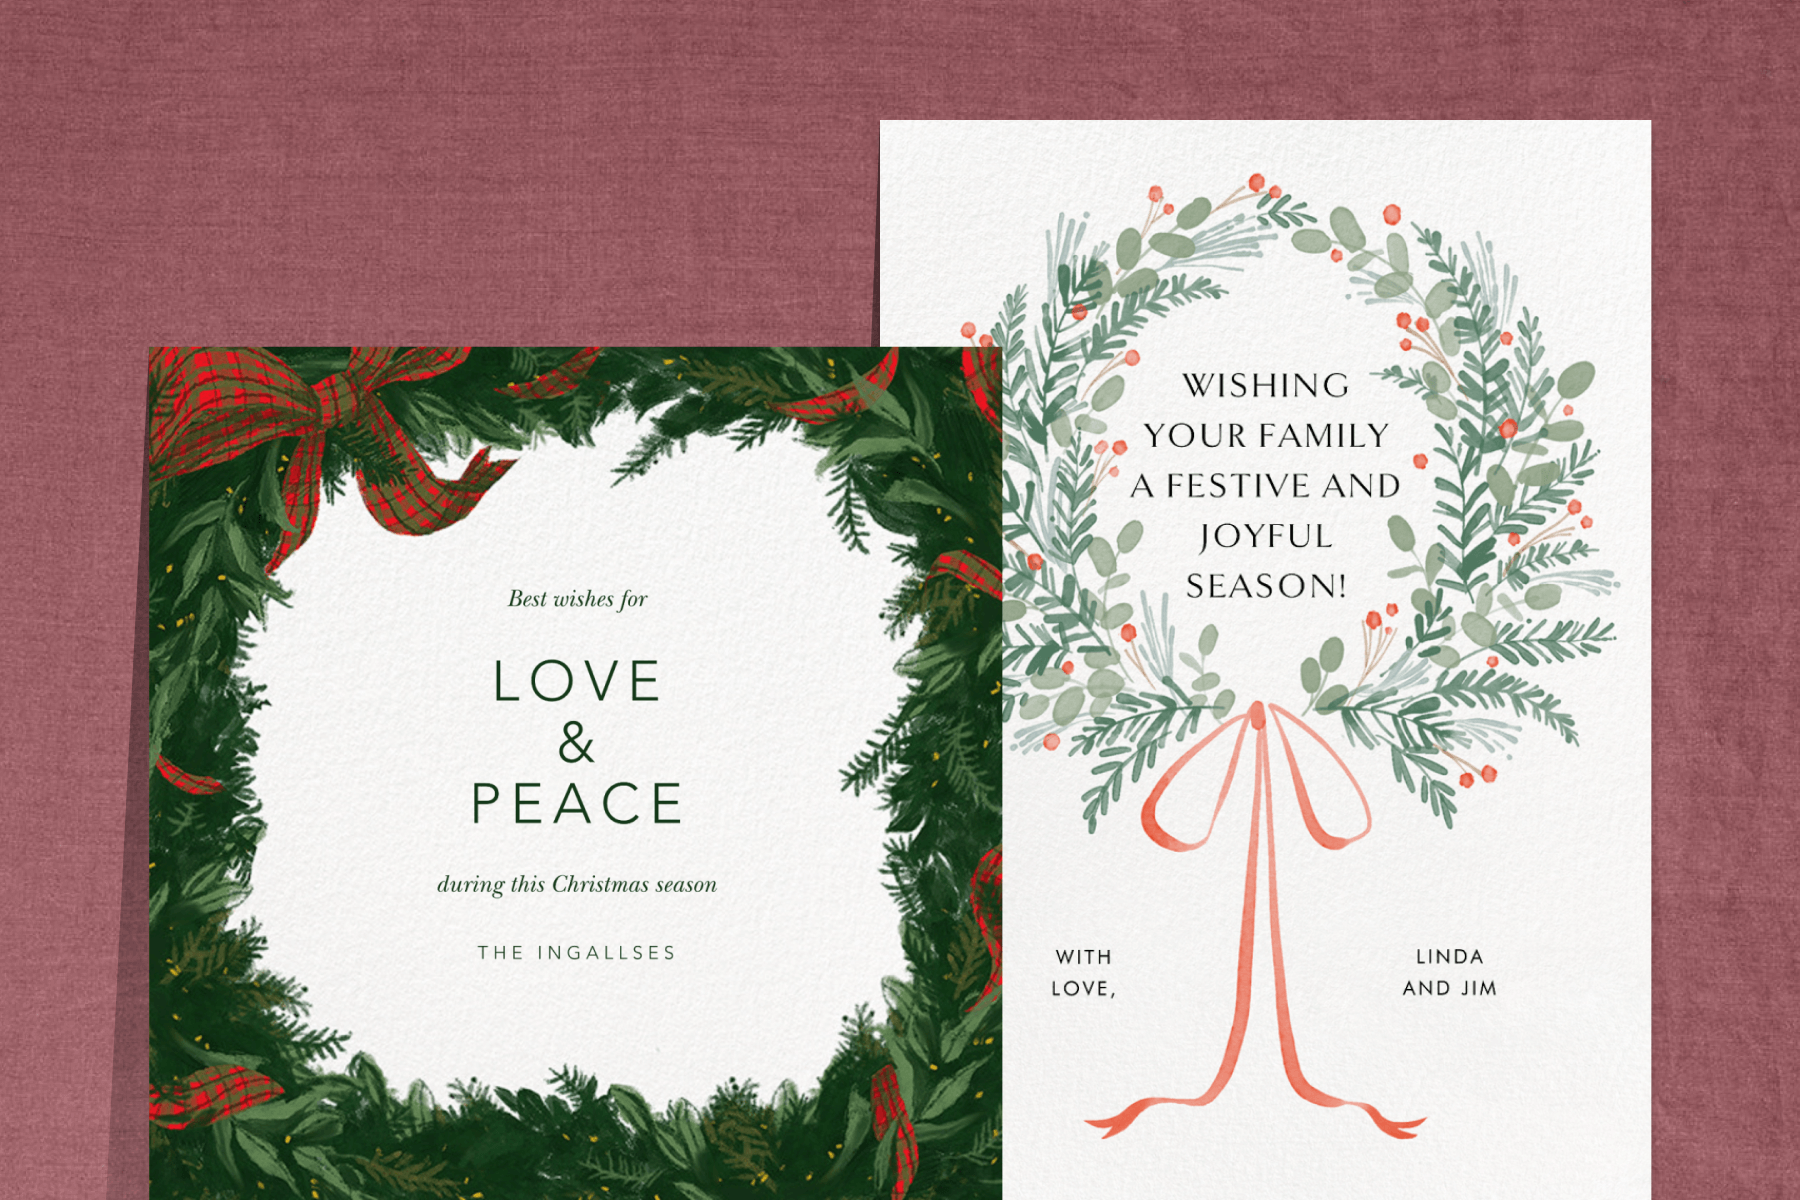 left: A holiday card with a green wreath-like border and a red plaid ribbon woven throughout. Right: A white holiday card with a delicately drawn wreath and long red ribbon bow.